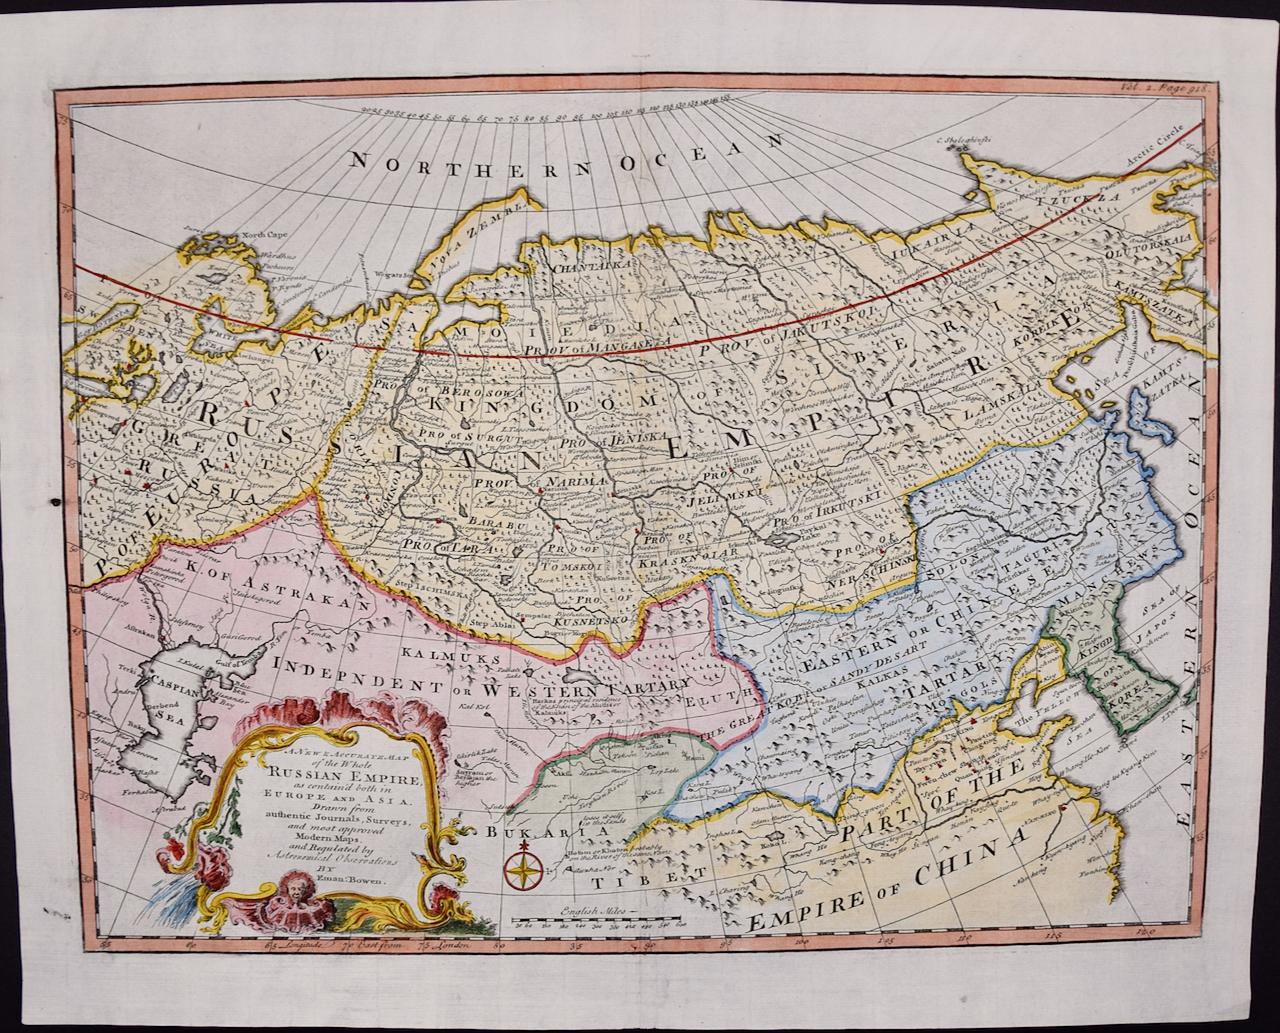 Emanuel Bowen Print - Map of the Russian Empire: An Original 18th Century Hand-colored Map by E. Bowen